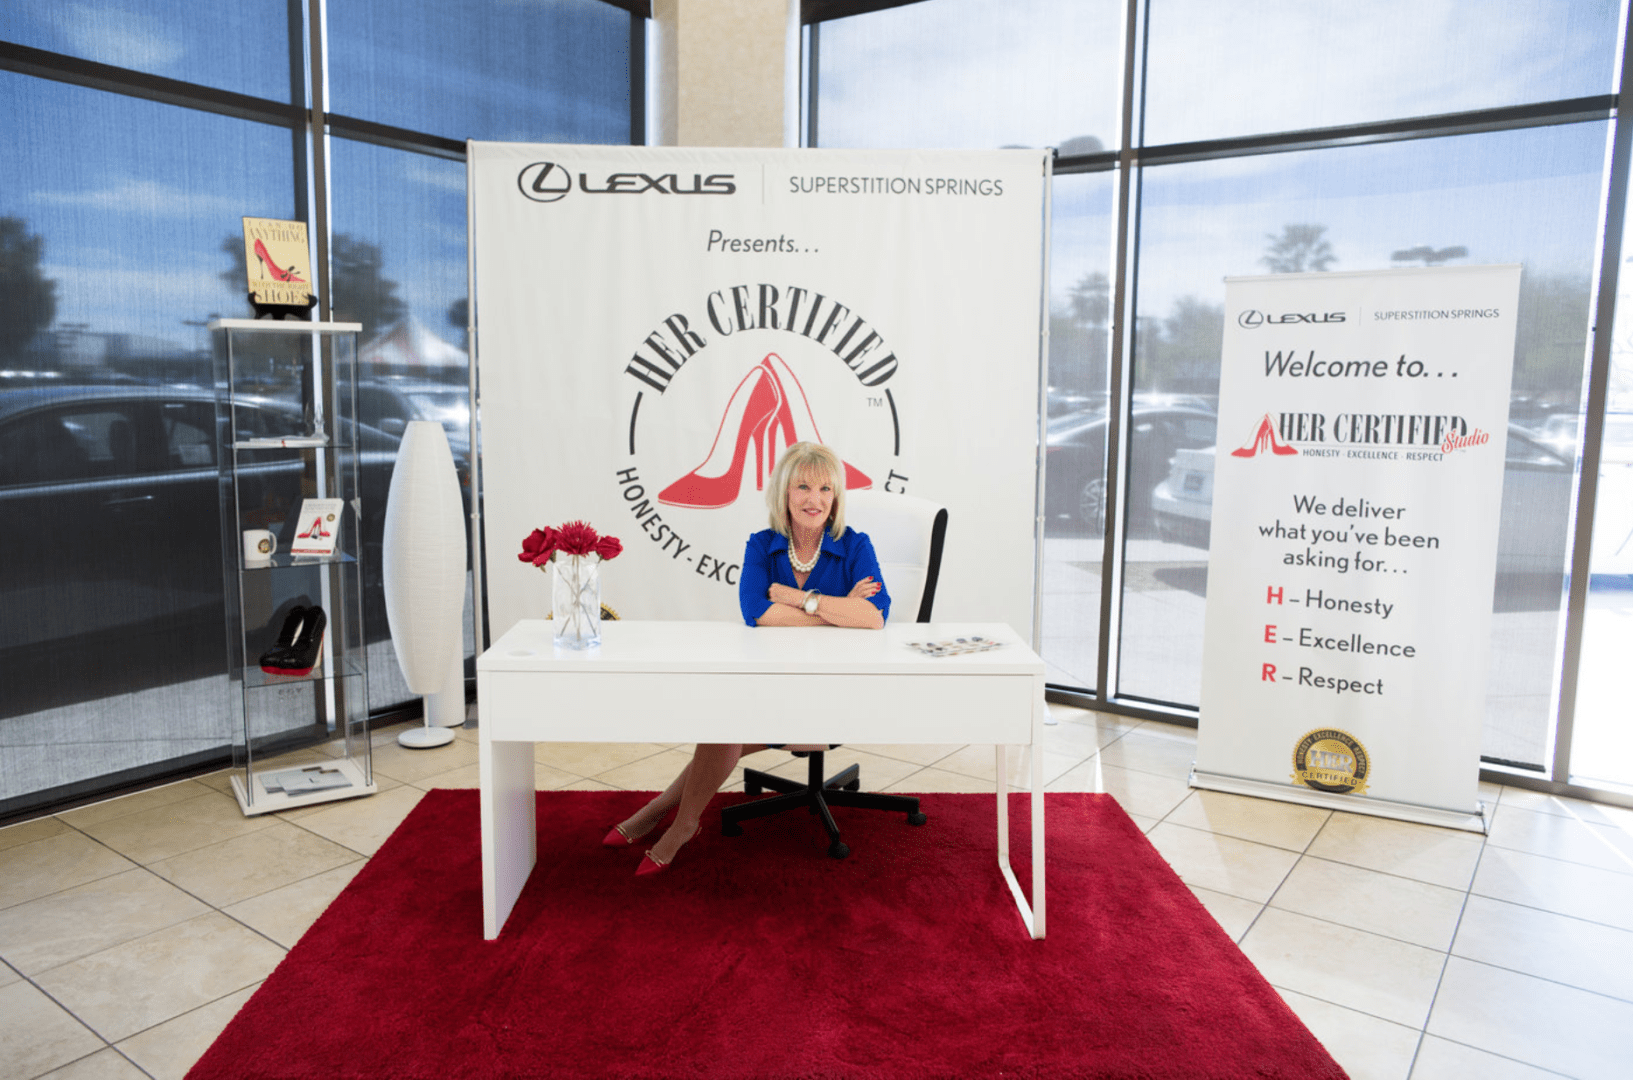 A woman sits at a promotional table with a lexus superstition springs banner in a dealership, smiling at the camera.